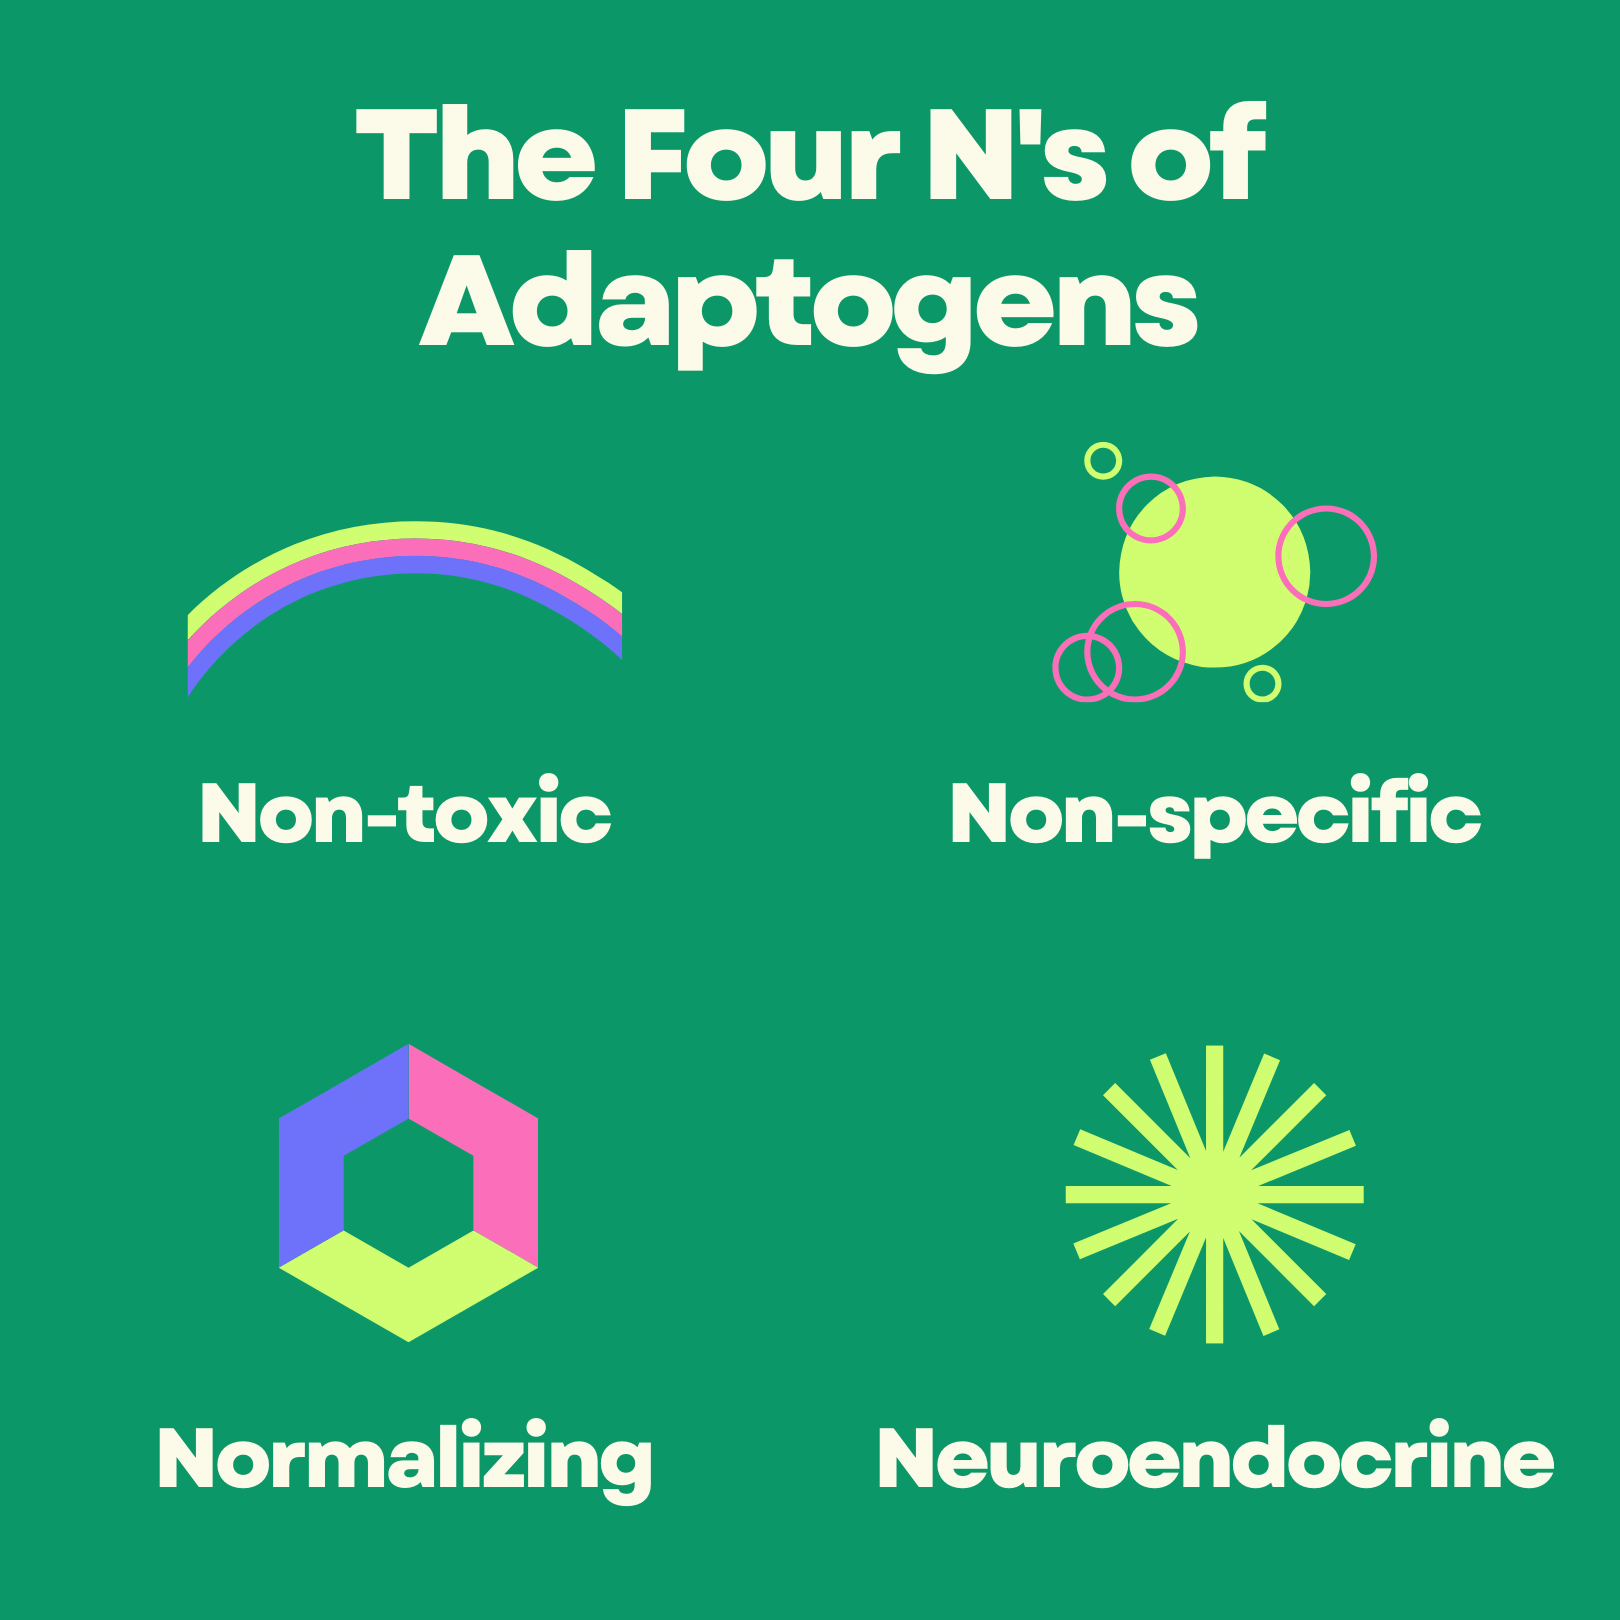 The Four N's of Adaptogens